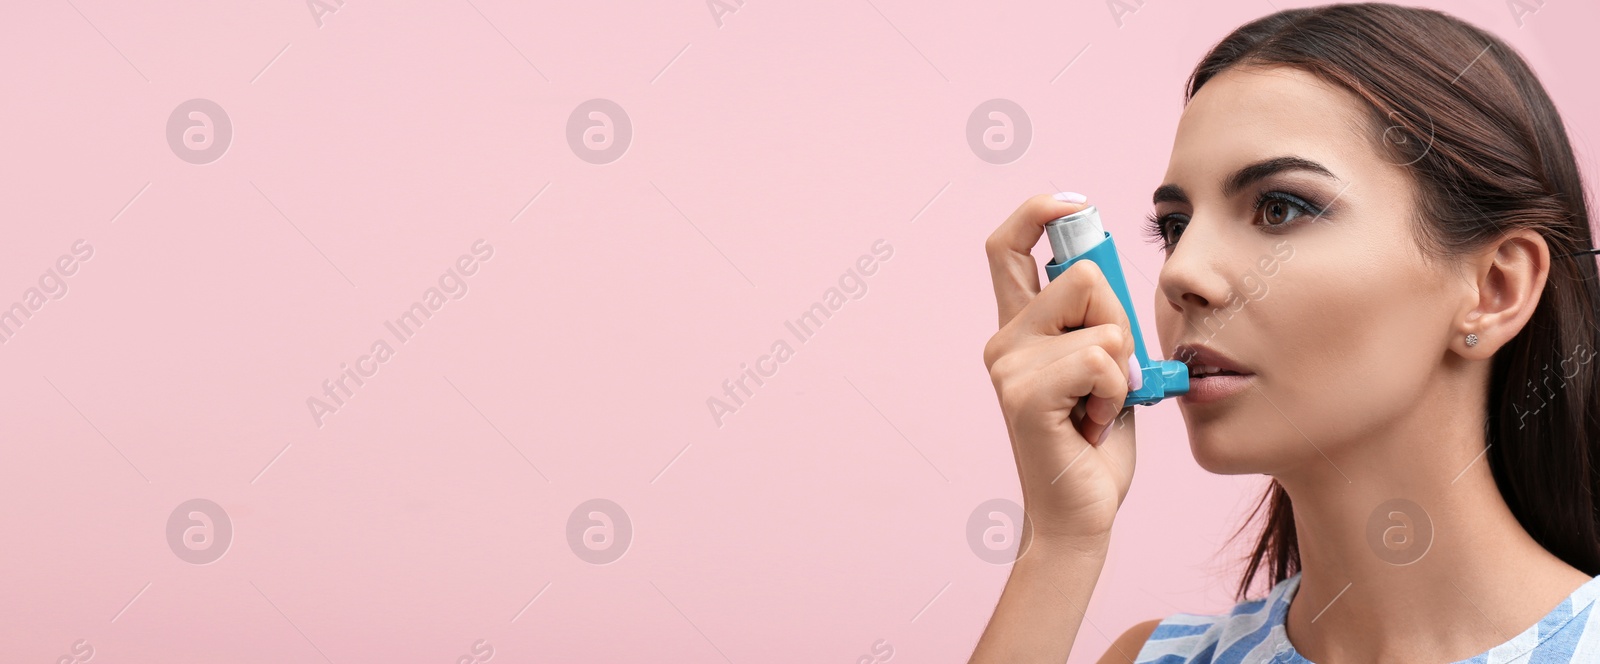 Image of Young woman using asthma inhaler on color background, space for text. Banner design